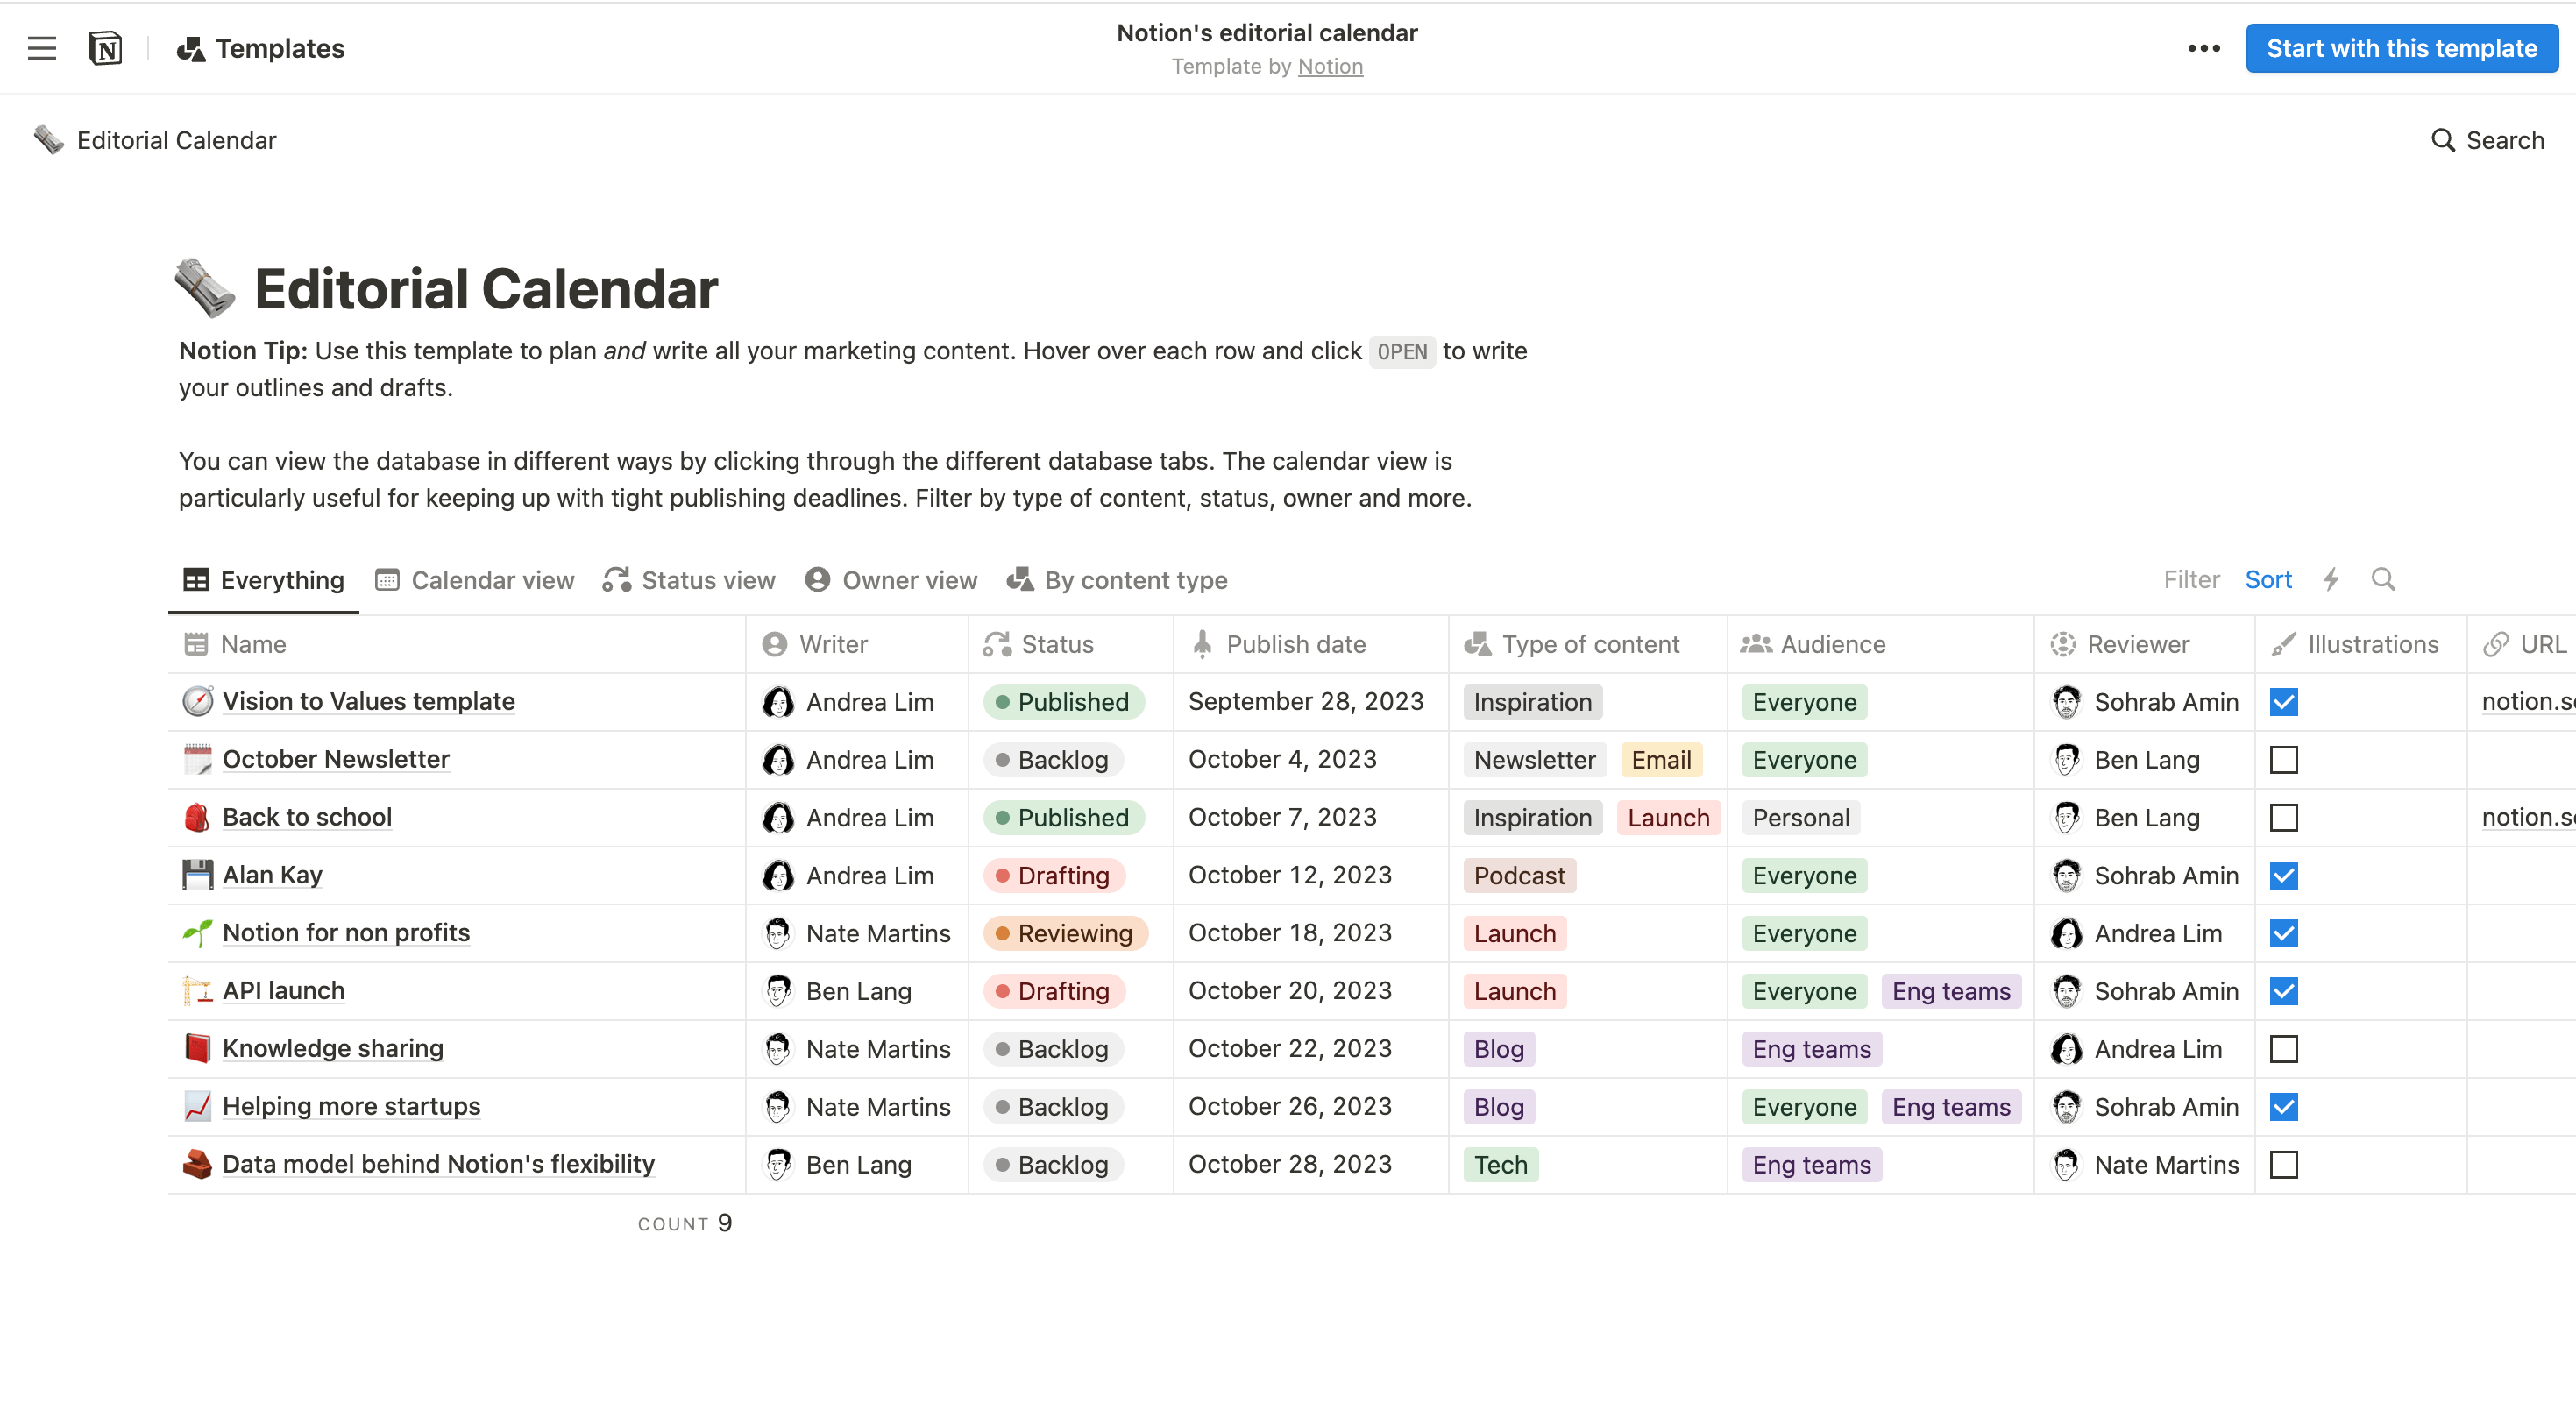 Notion's editorial calendar template offering a comprehensive tool for planning and writing marketing content including various database views like calendar, status, and content type filters, aiding in managing publishing deadlines and content organization